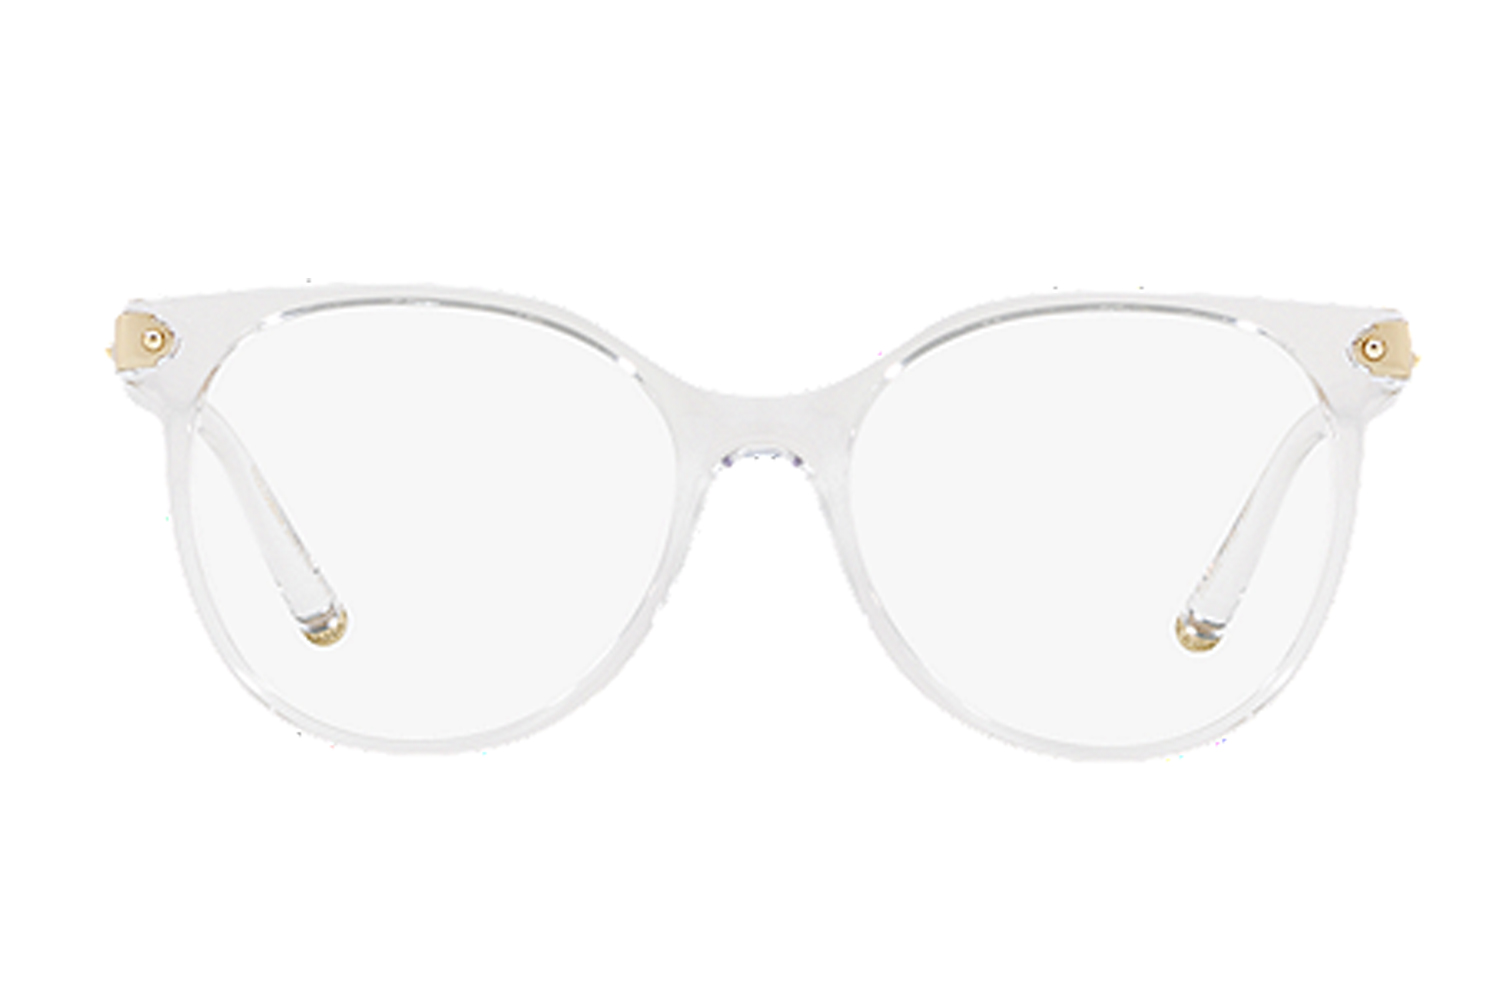 Dolce & Gabbana eyewear available at OPSM